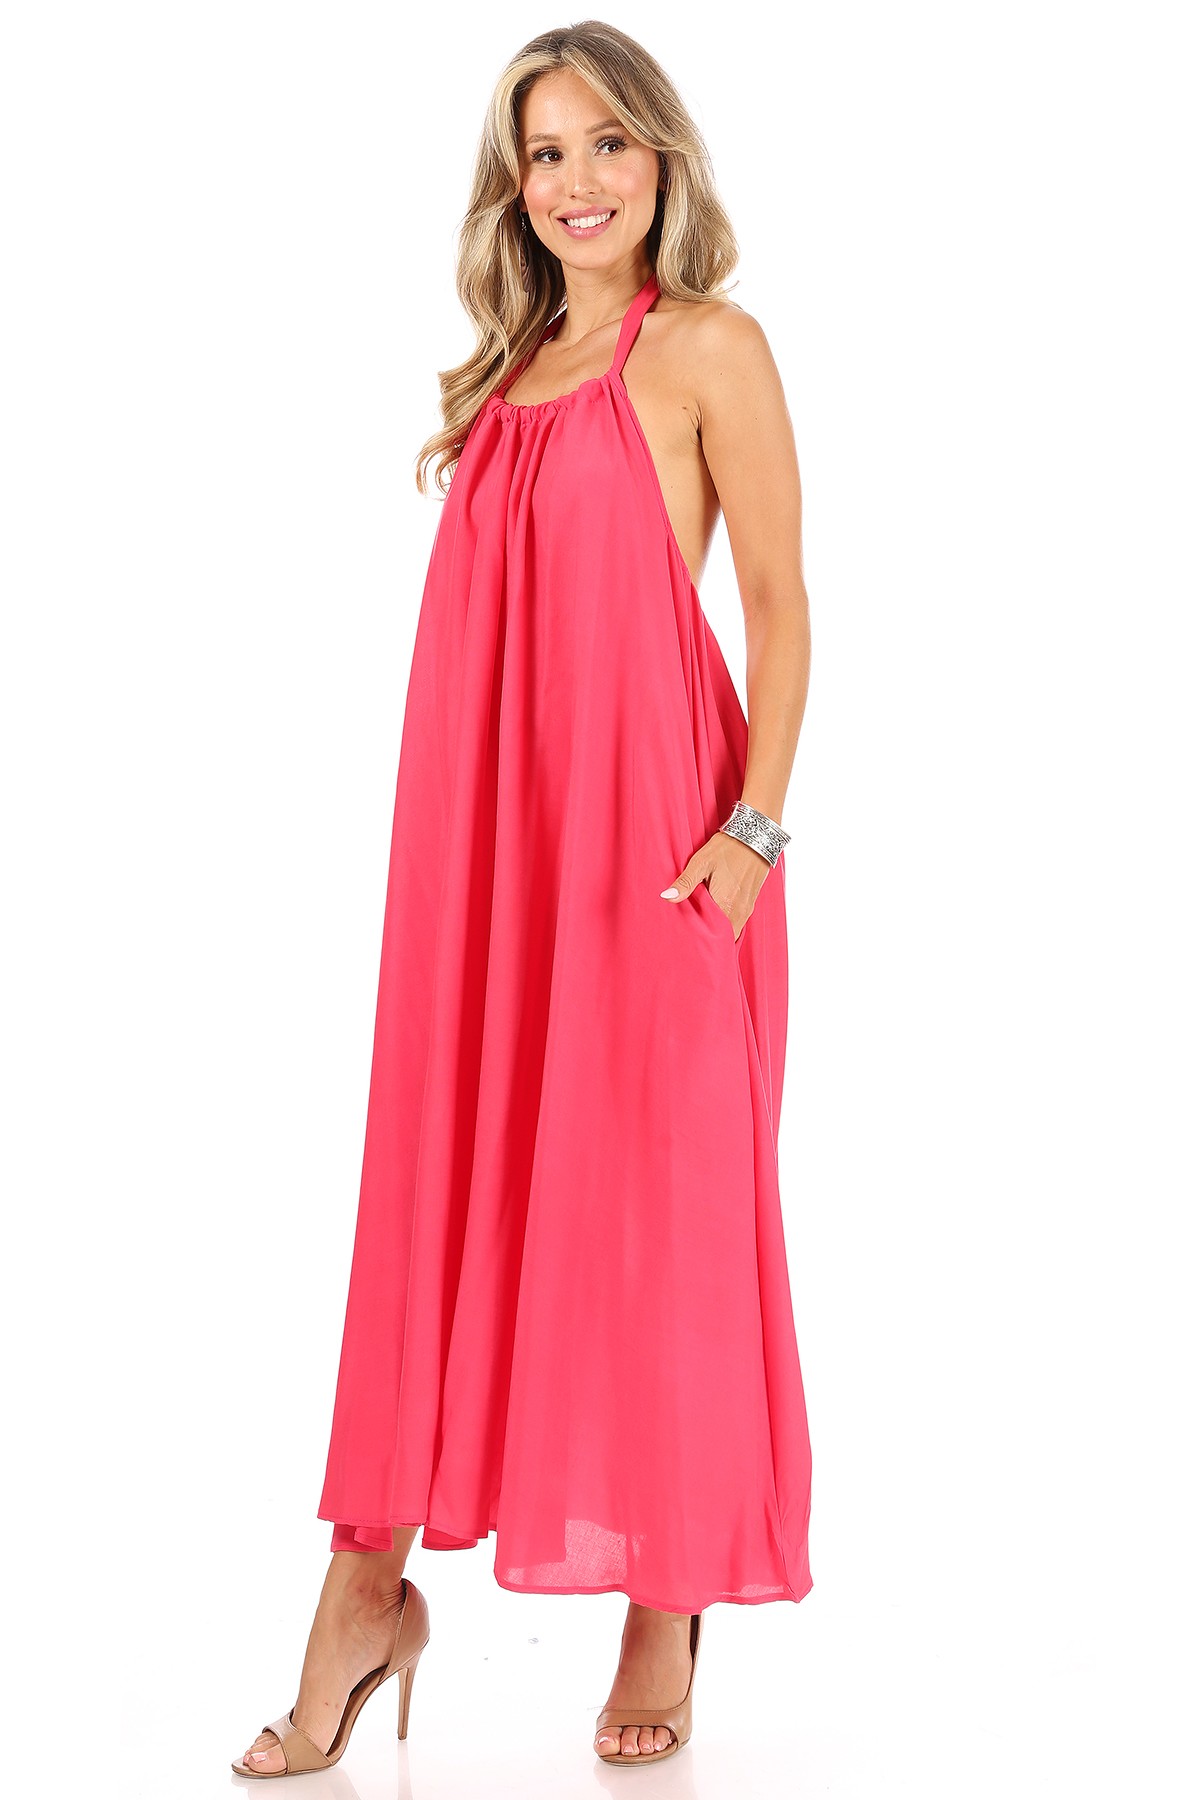 All Eyes On Me Collection - Linen Halter Maxi Dress